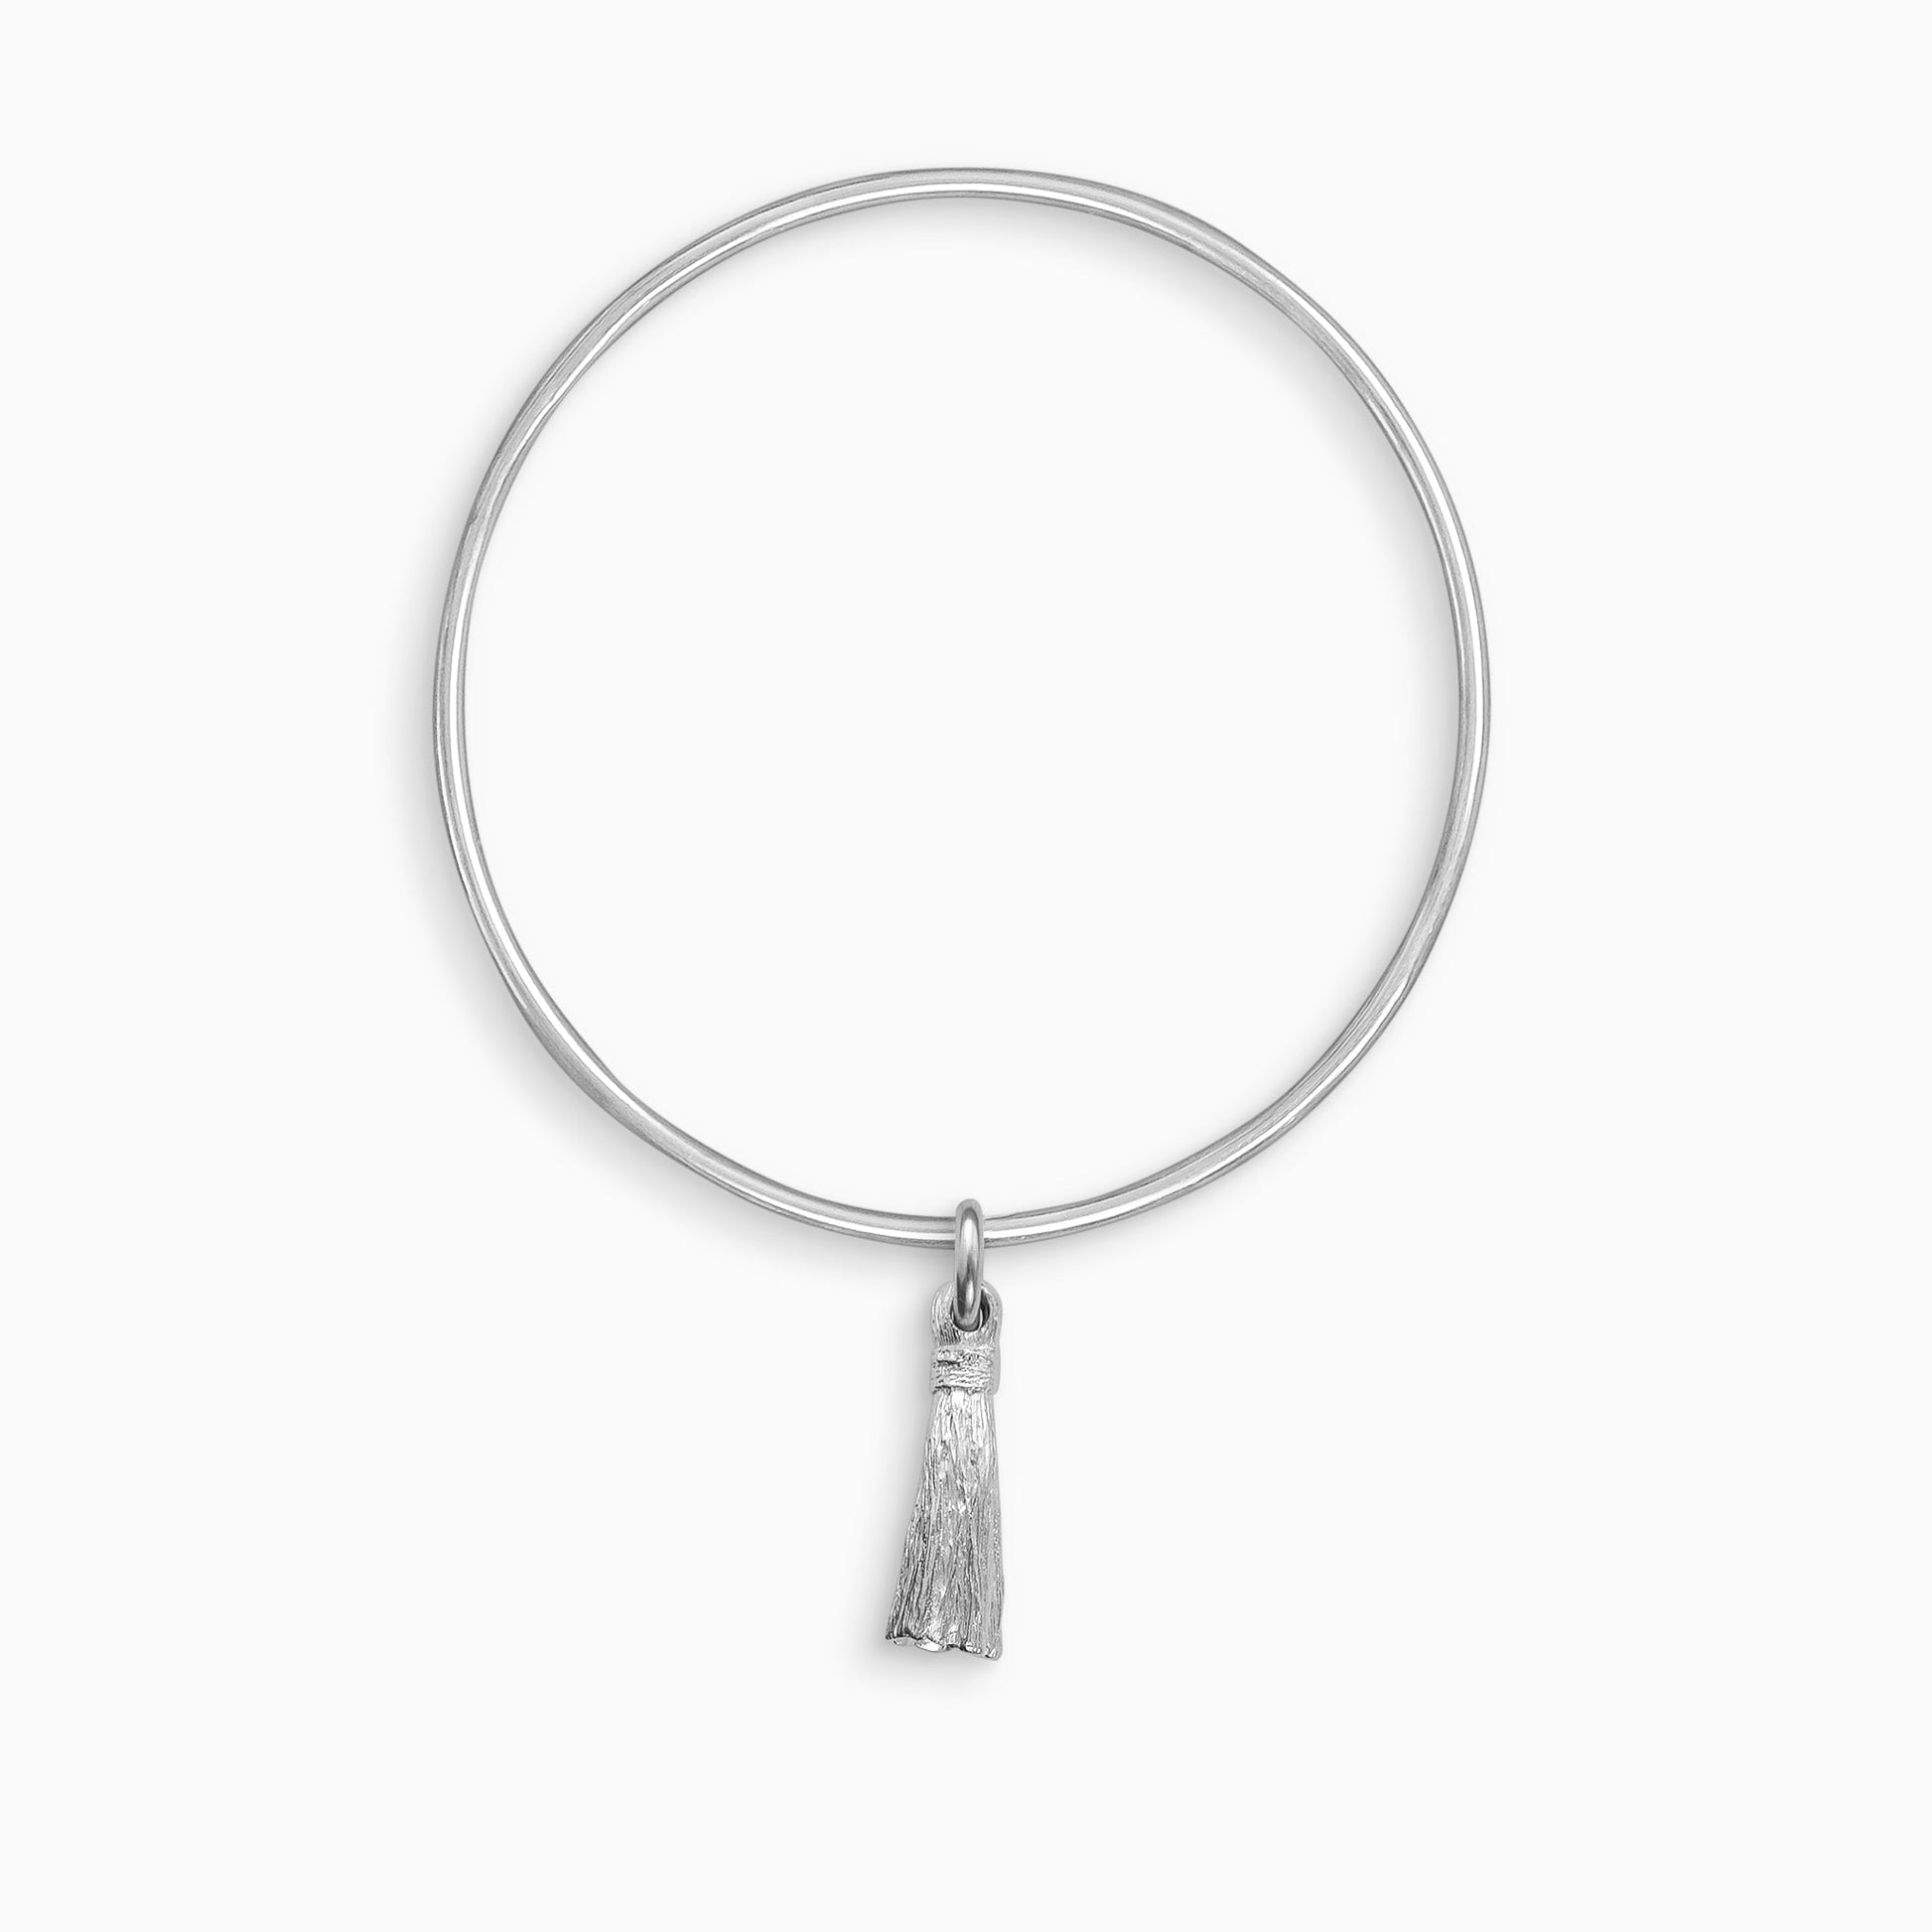 A recycled Silver Tassel charm, with the texture of an actual tassel, freely moving on a round wire bangle. Charm 25mm. Bangle 63mm inside diameter x 2mm round wire.